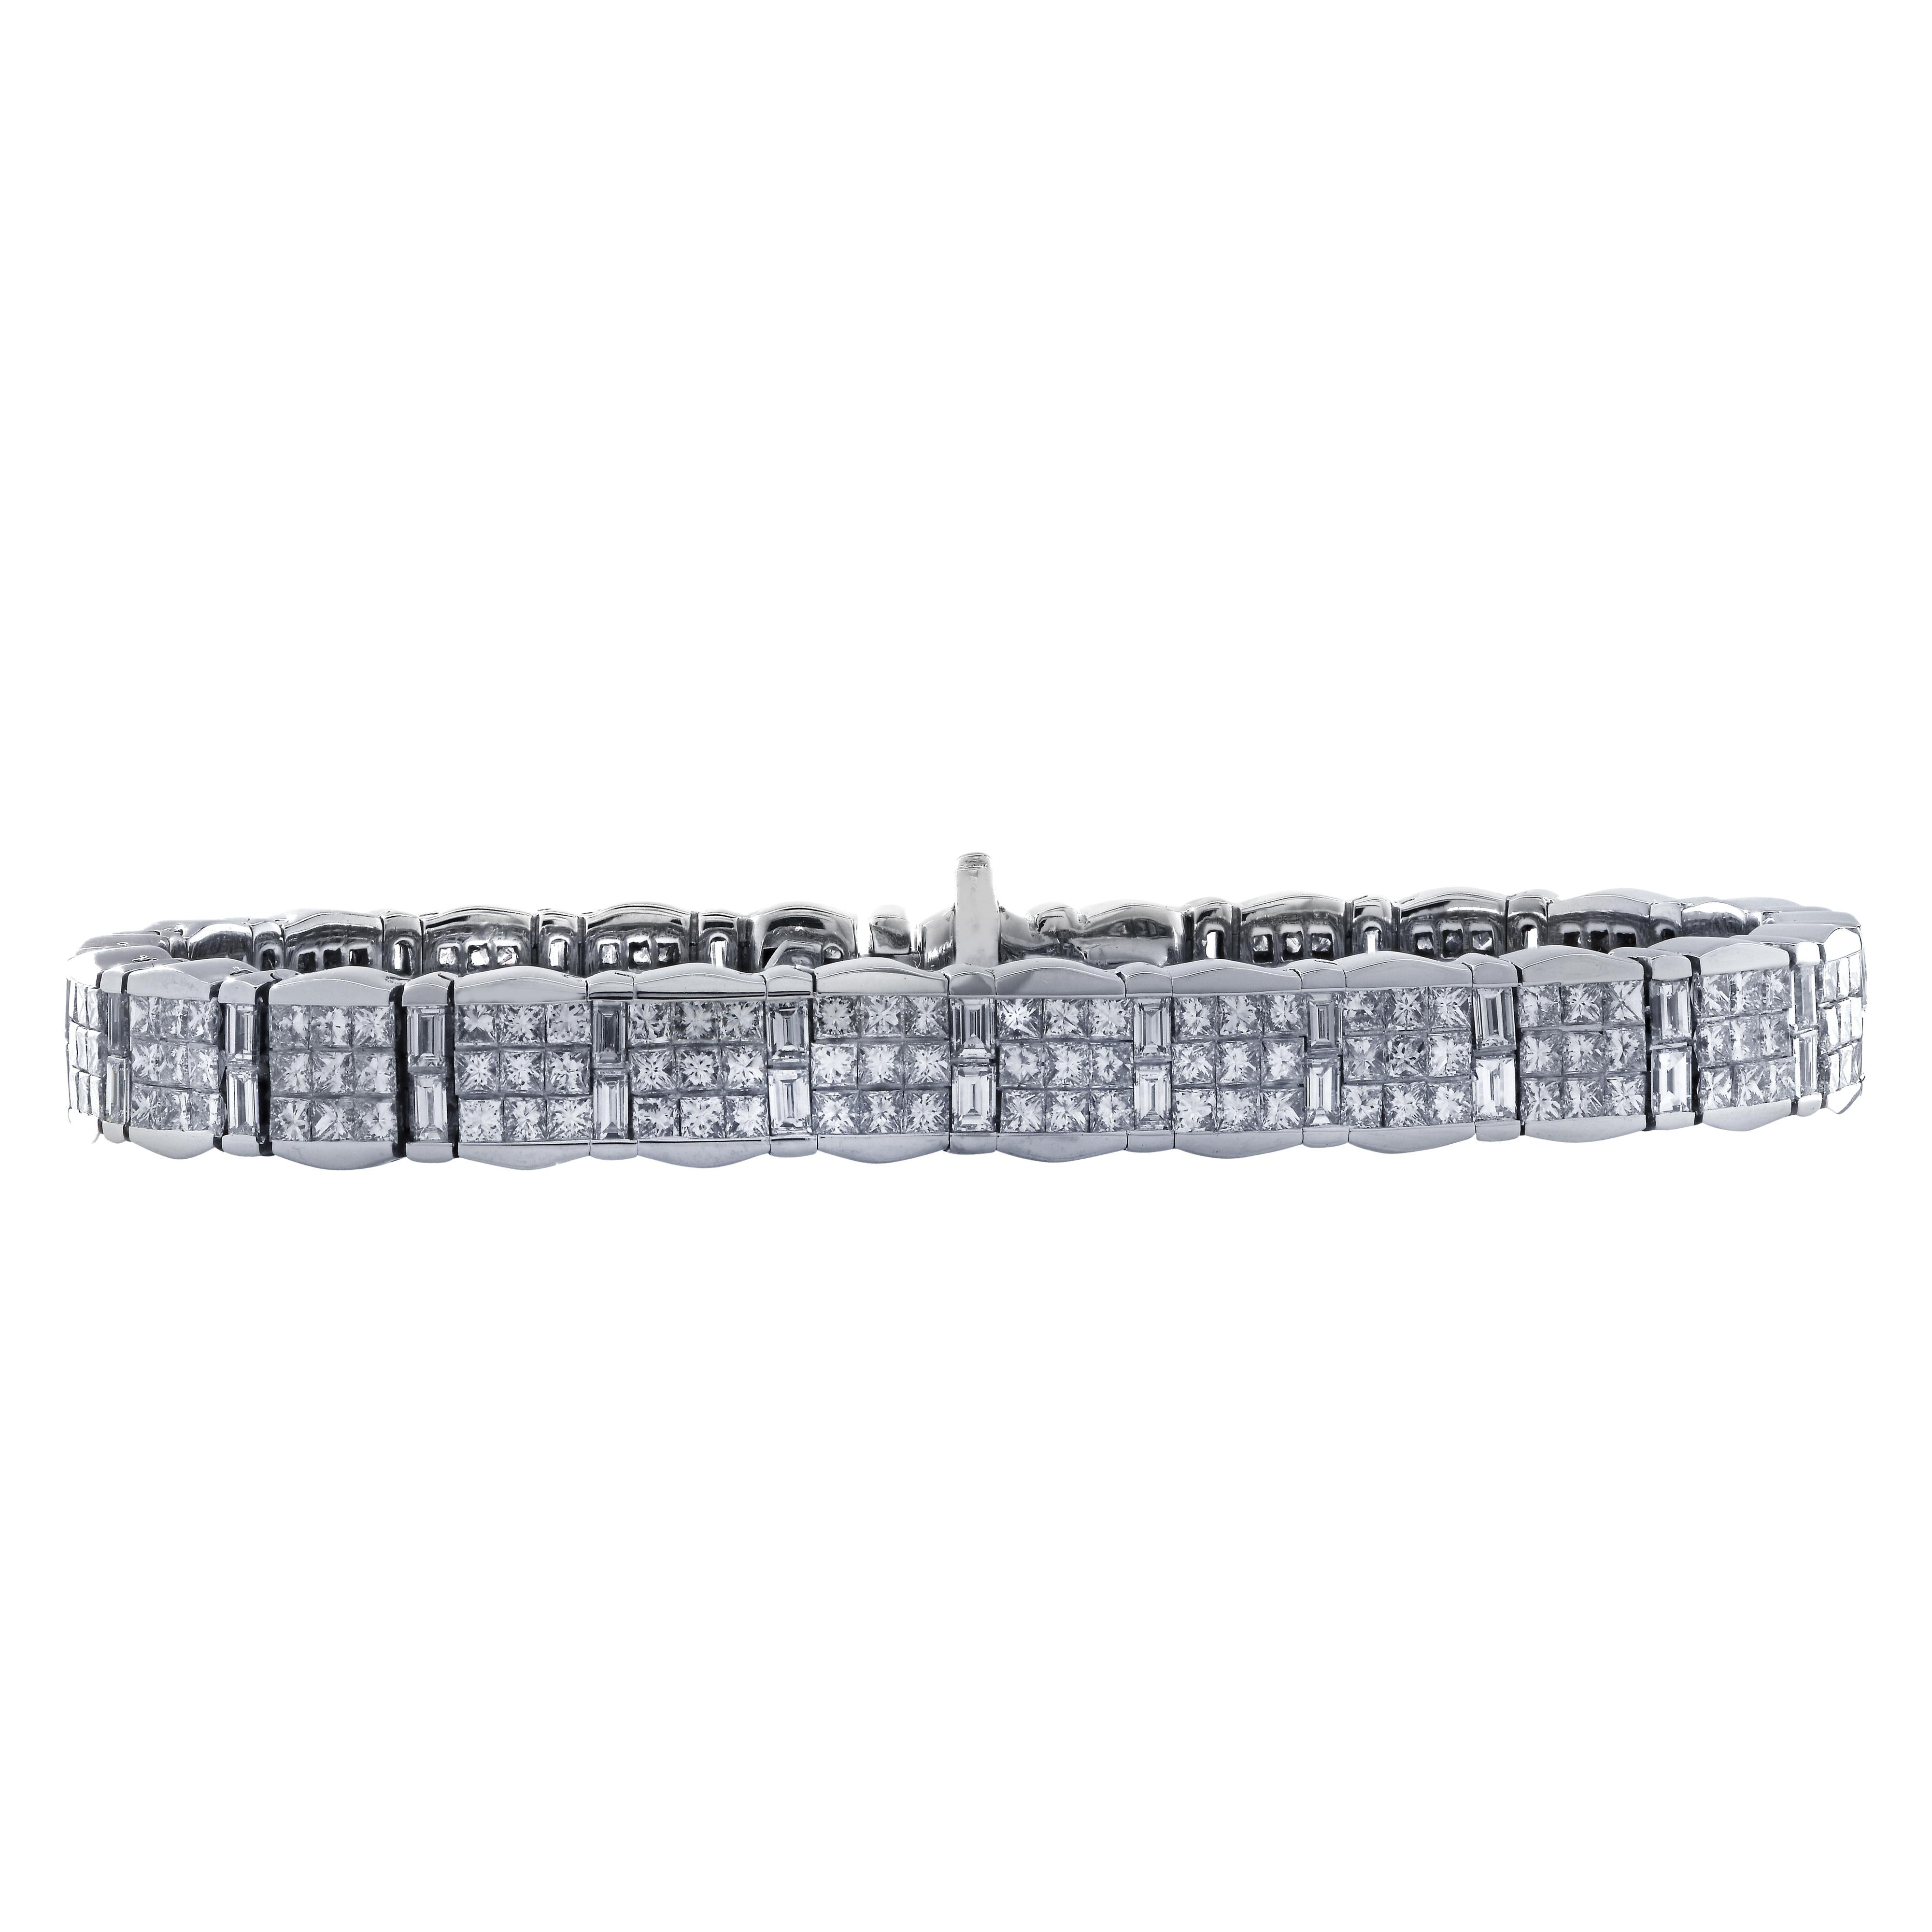 Spectacular bracelet crafted in 18 karat white gold featuring 275 princess and baguette cut diamonds weighing approximately 11 carats total, G color, VS clarity. 25 square links, each set with 9 princess cut diamonds interspersed with 25 links each